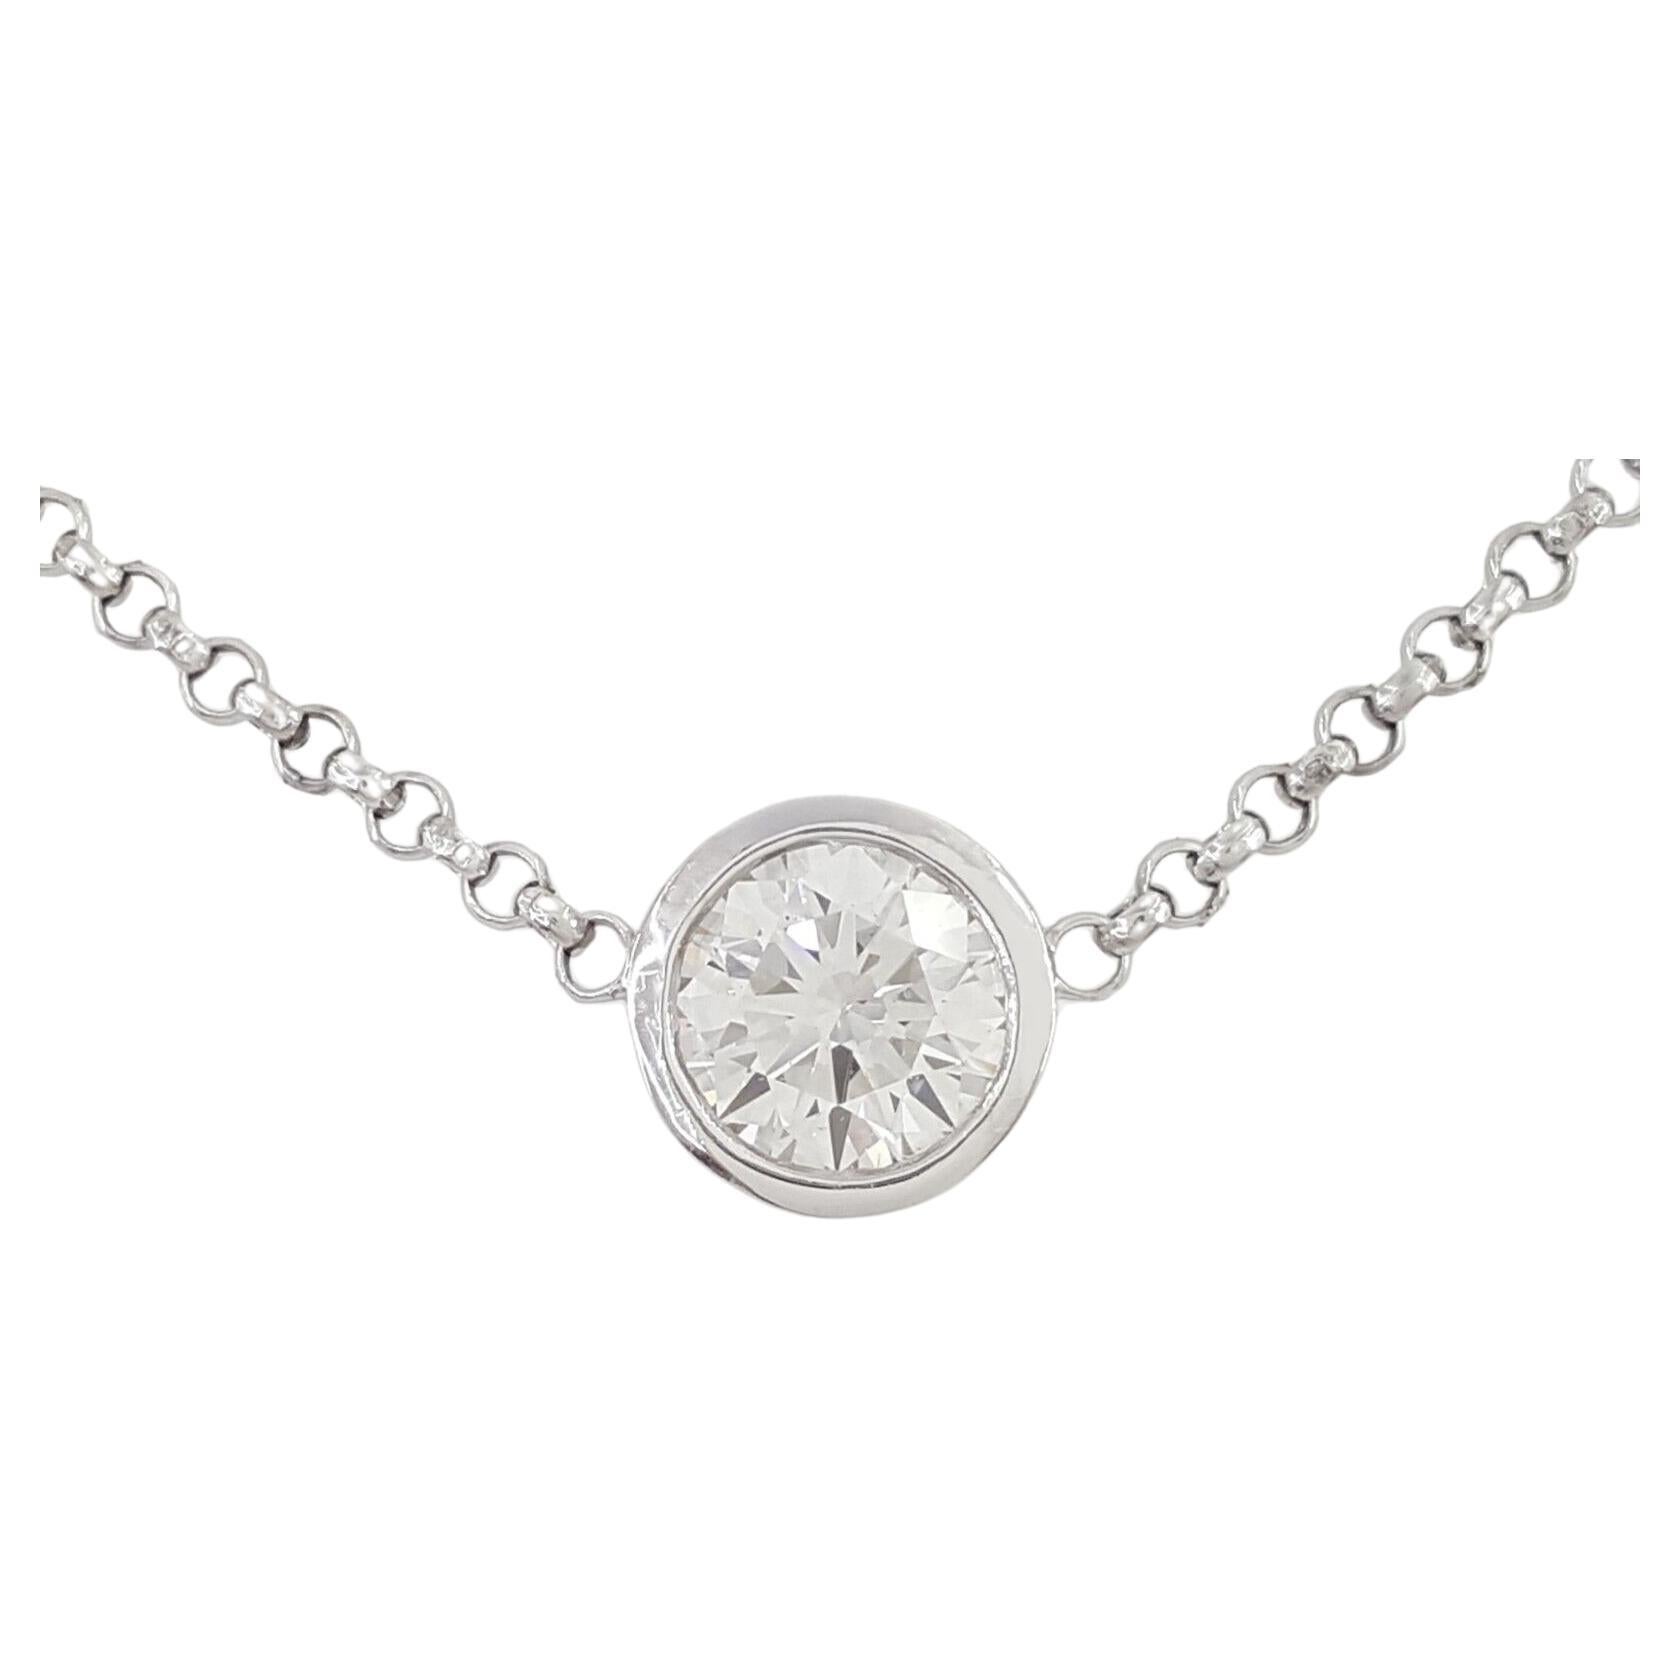 2 ct Total Weight Platinum Round Brilliant Cut Diamond By The Yard Necklace.

The necklace weighs 6.8 grams, 17